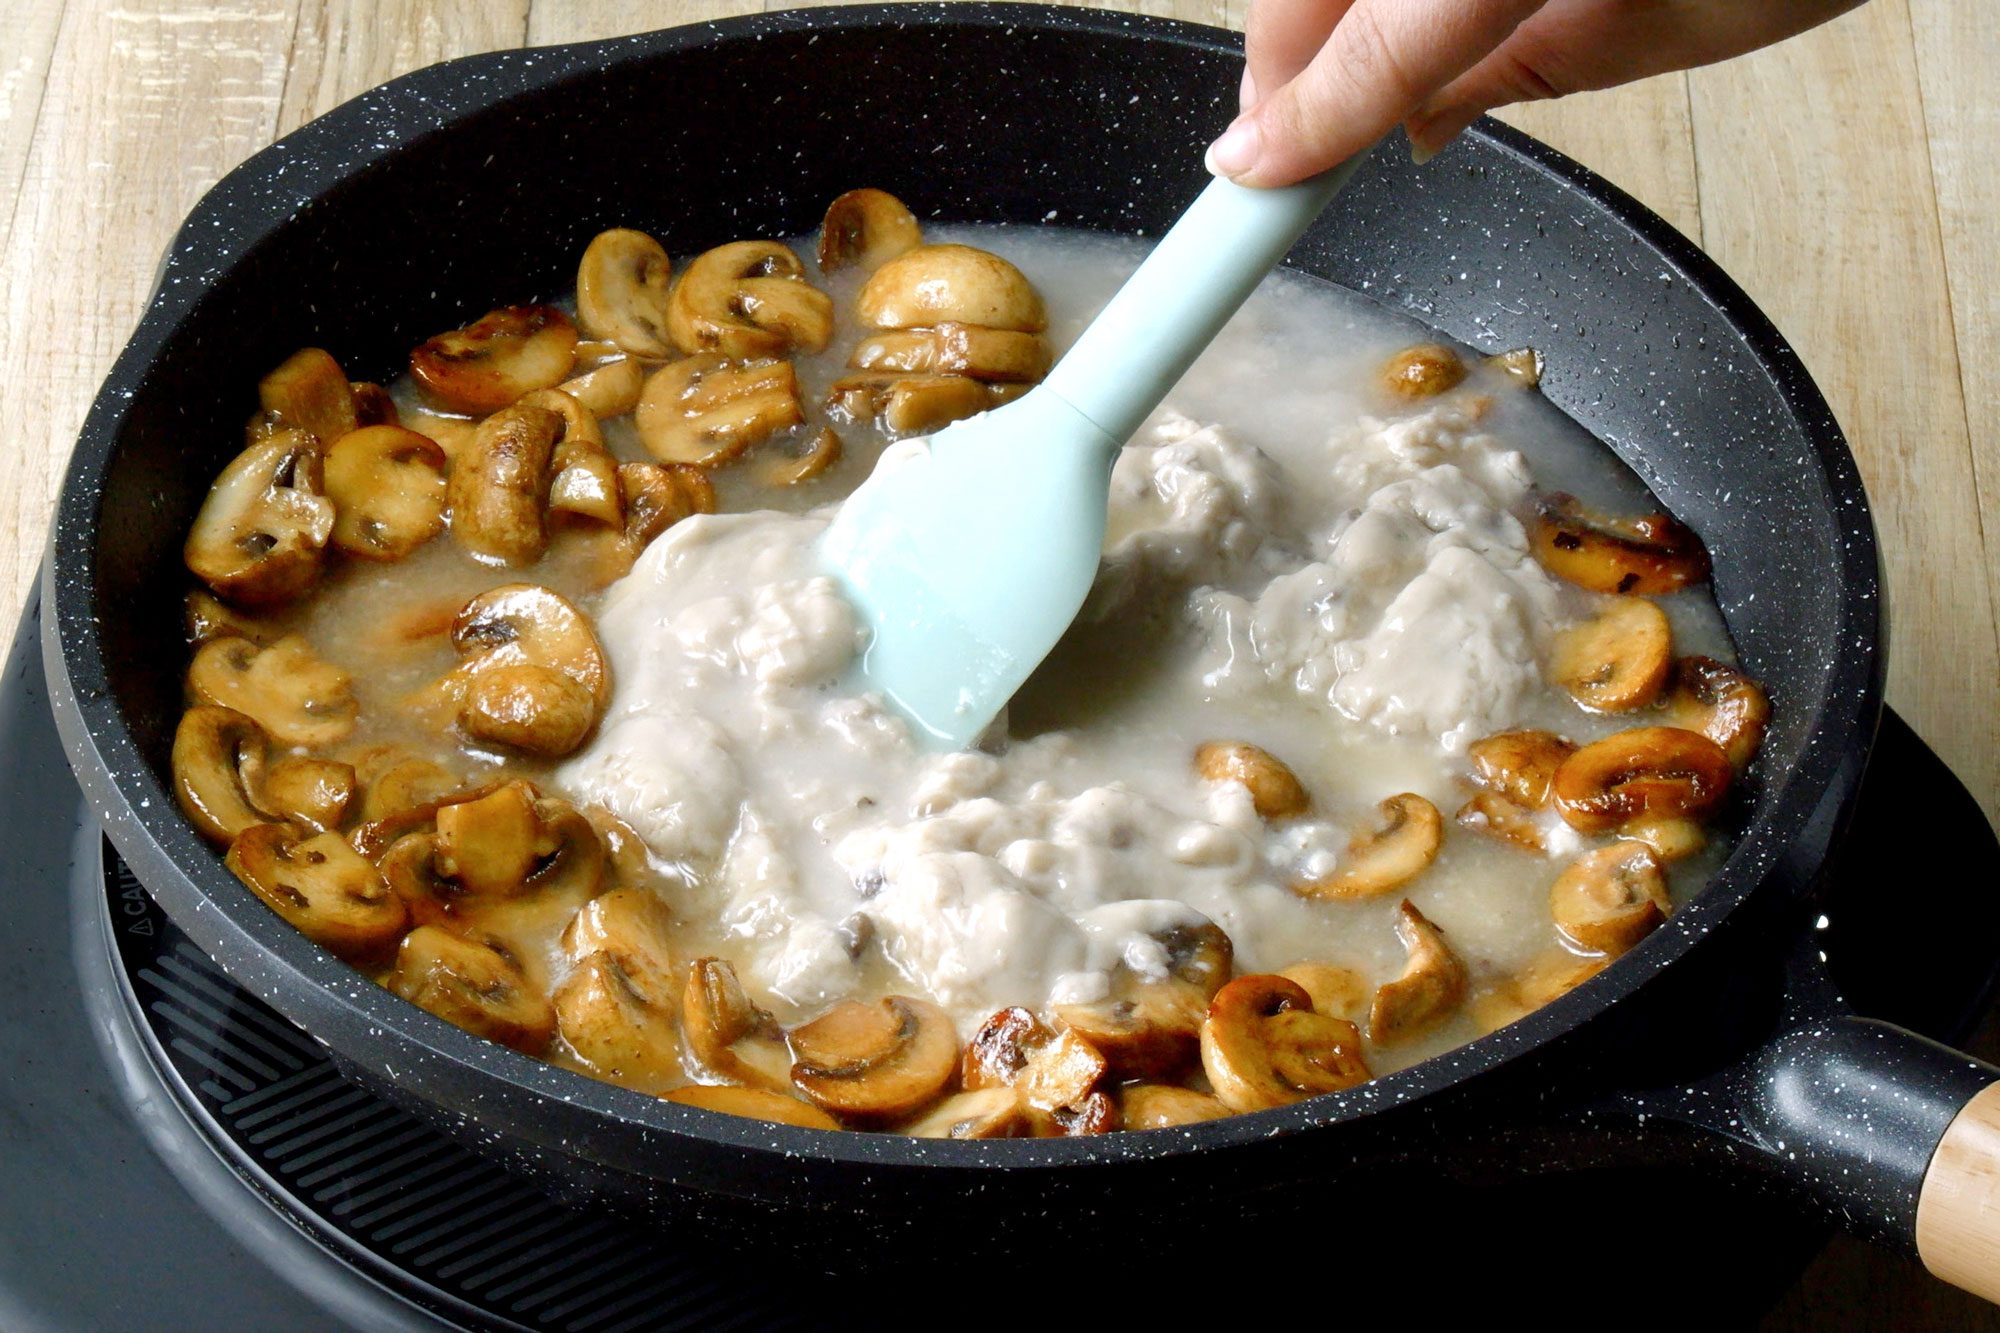 Combine the cream of mushroom soup and water in a microwave-safe bowl